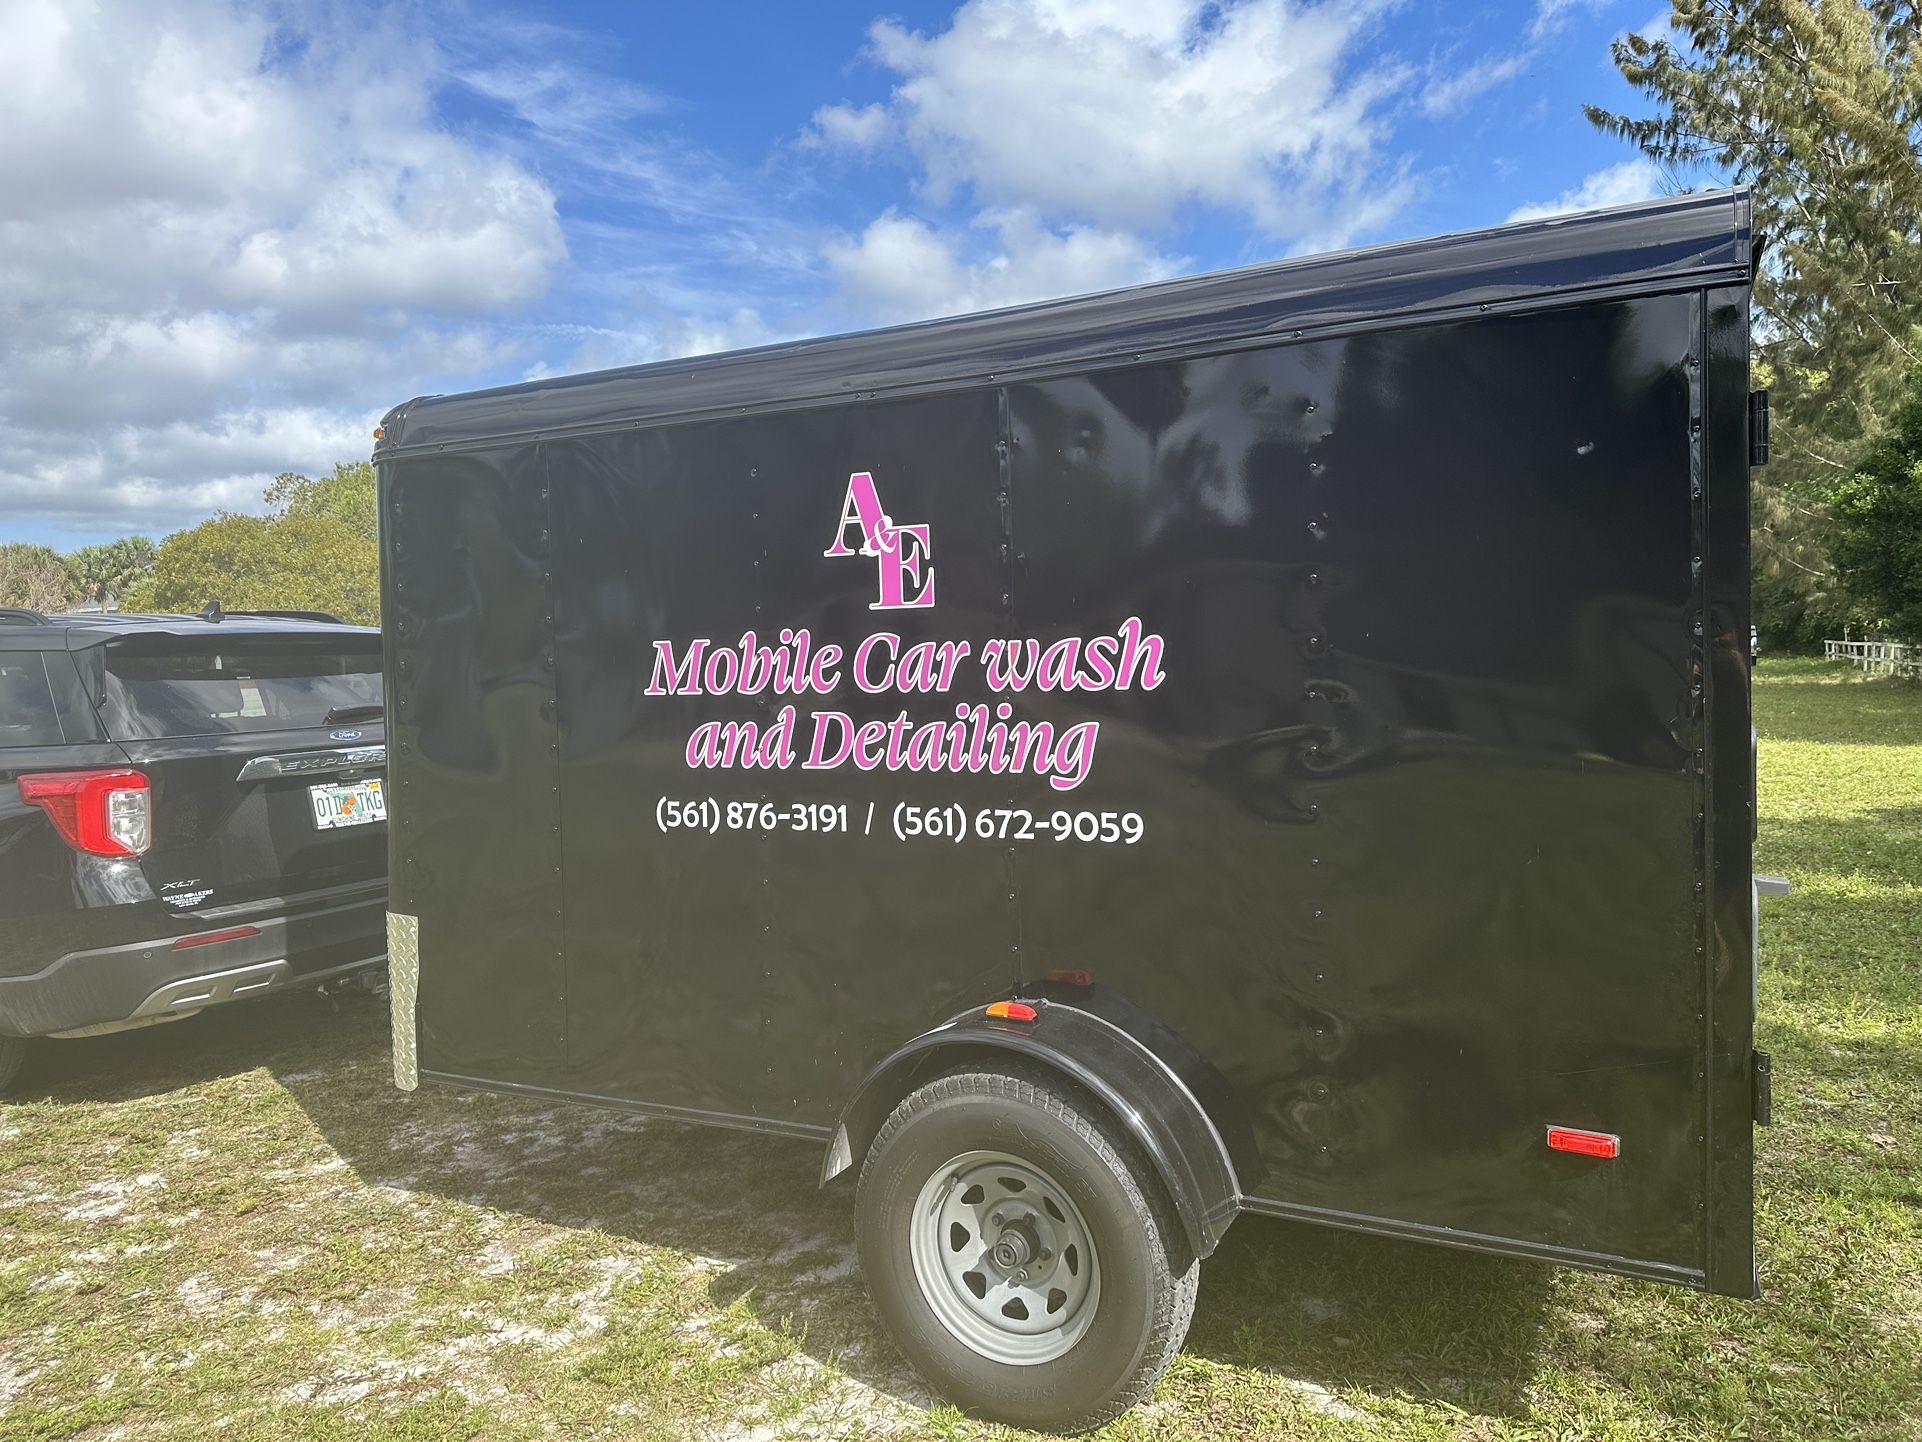 Mobile Car Wash And Detailing Trailer